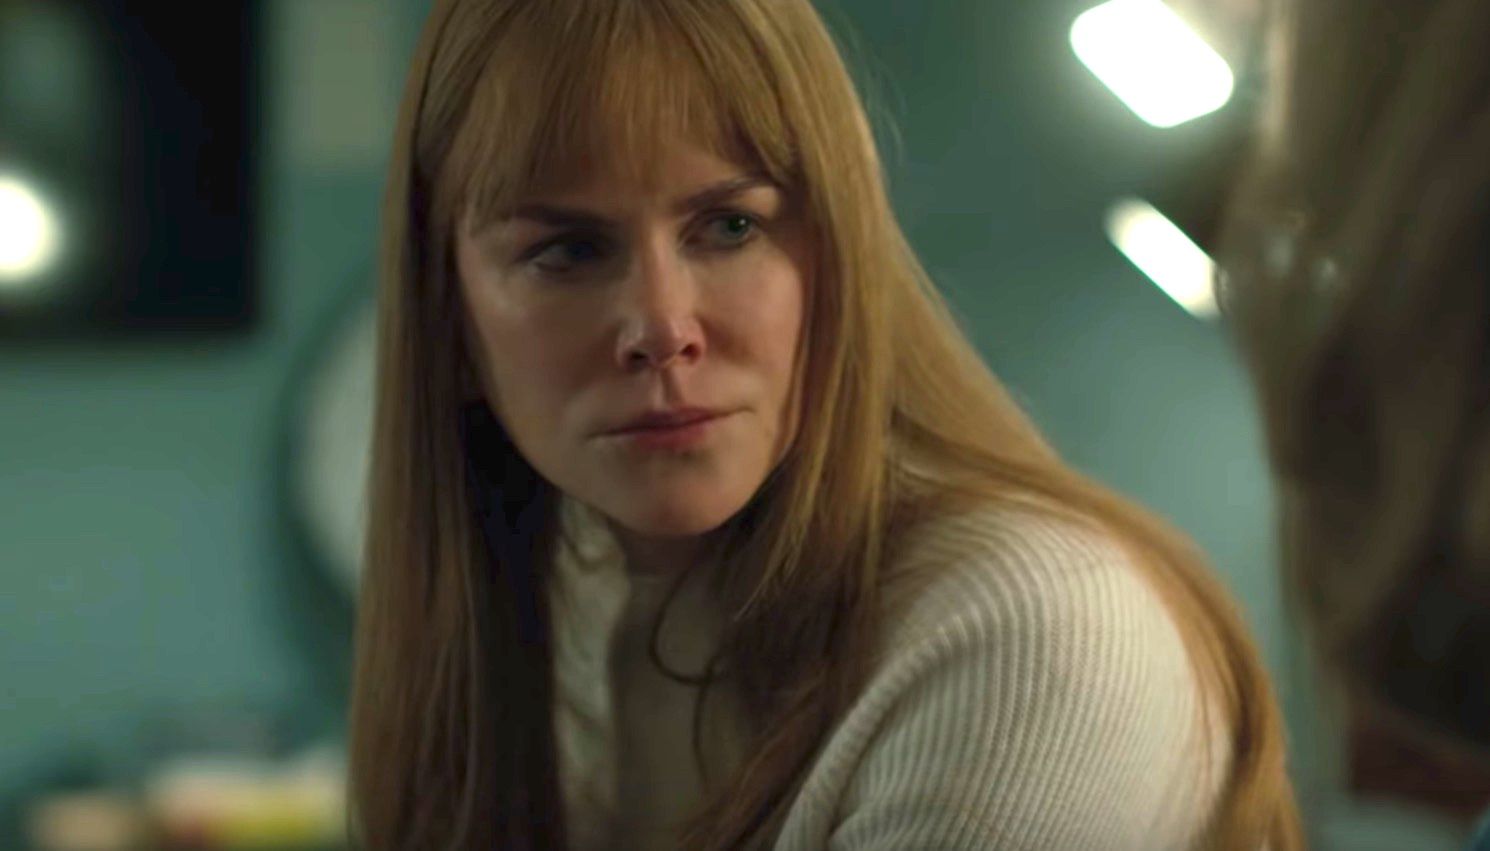 Nicole Kidman to star in new HBO series from Big Little Lies creator